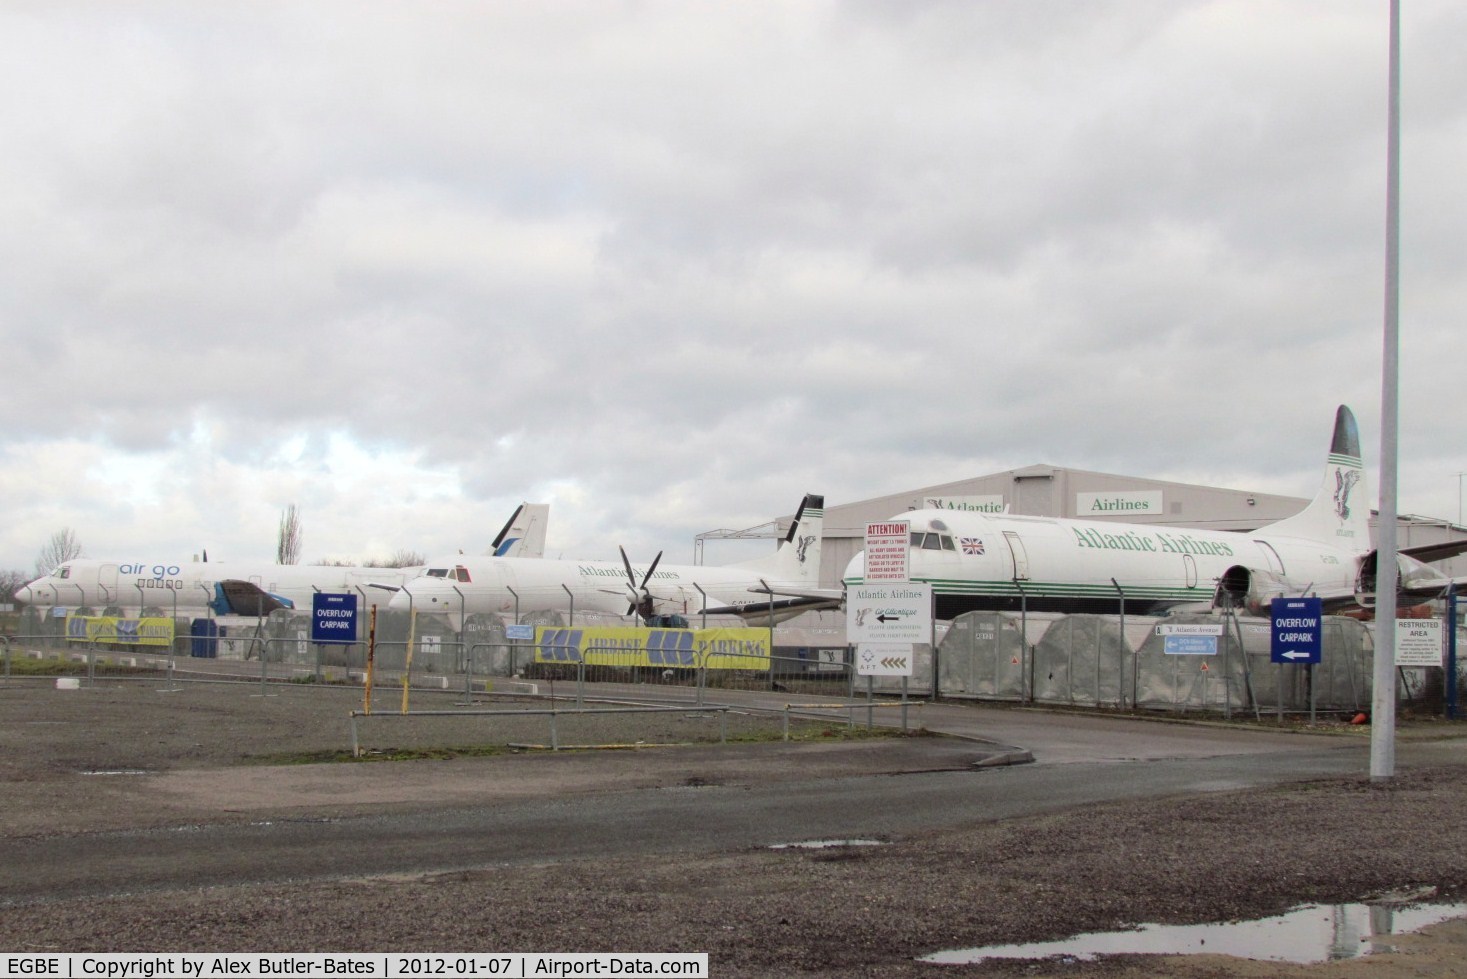 Coventry Airport, Coventry, England United Kingdom (EGBE) - Atlantic Airlines ramp